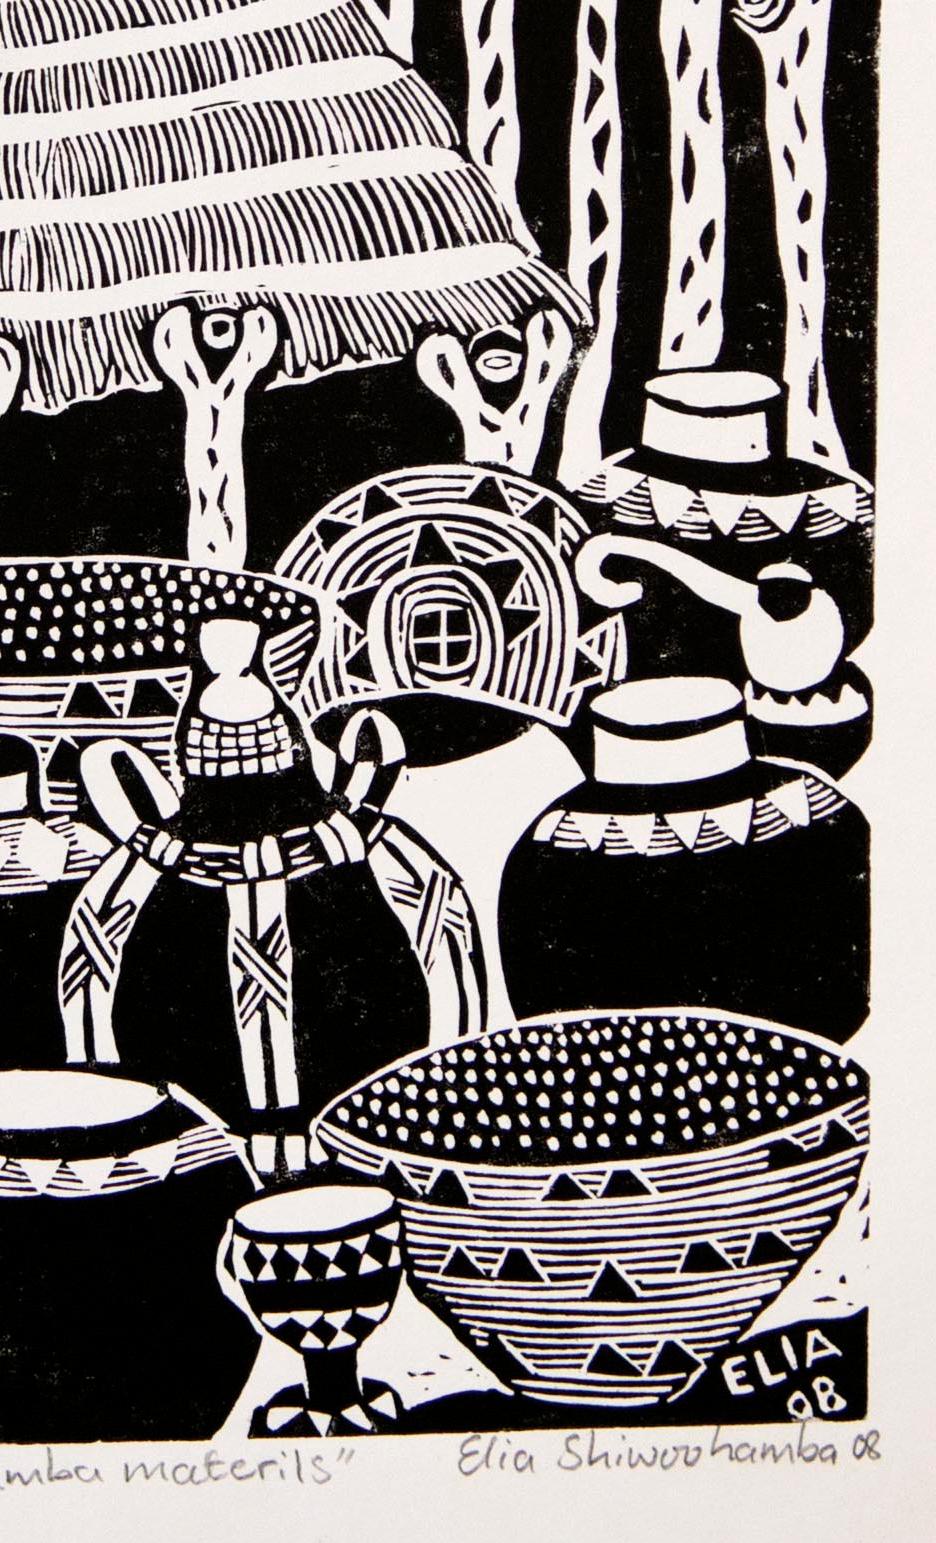 Owamba Materials, 2008. Linoleum block print on paper

Elia Shiwoohamba was born in 1981 in Windhoek, Namibia. He graduated from the John Muafangejo Art Centre in Windhoek in 2006. Specialising in printmaking and sculpture, Shiwoohamba works as a